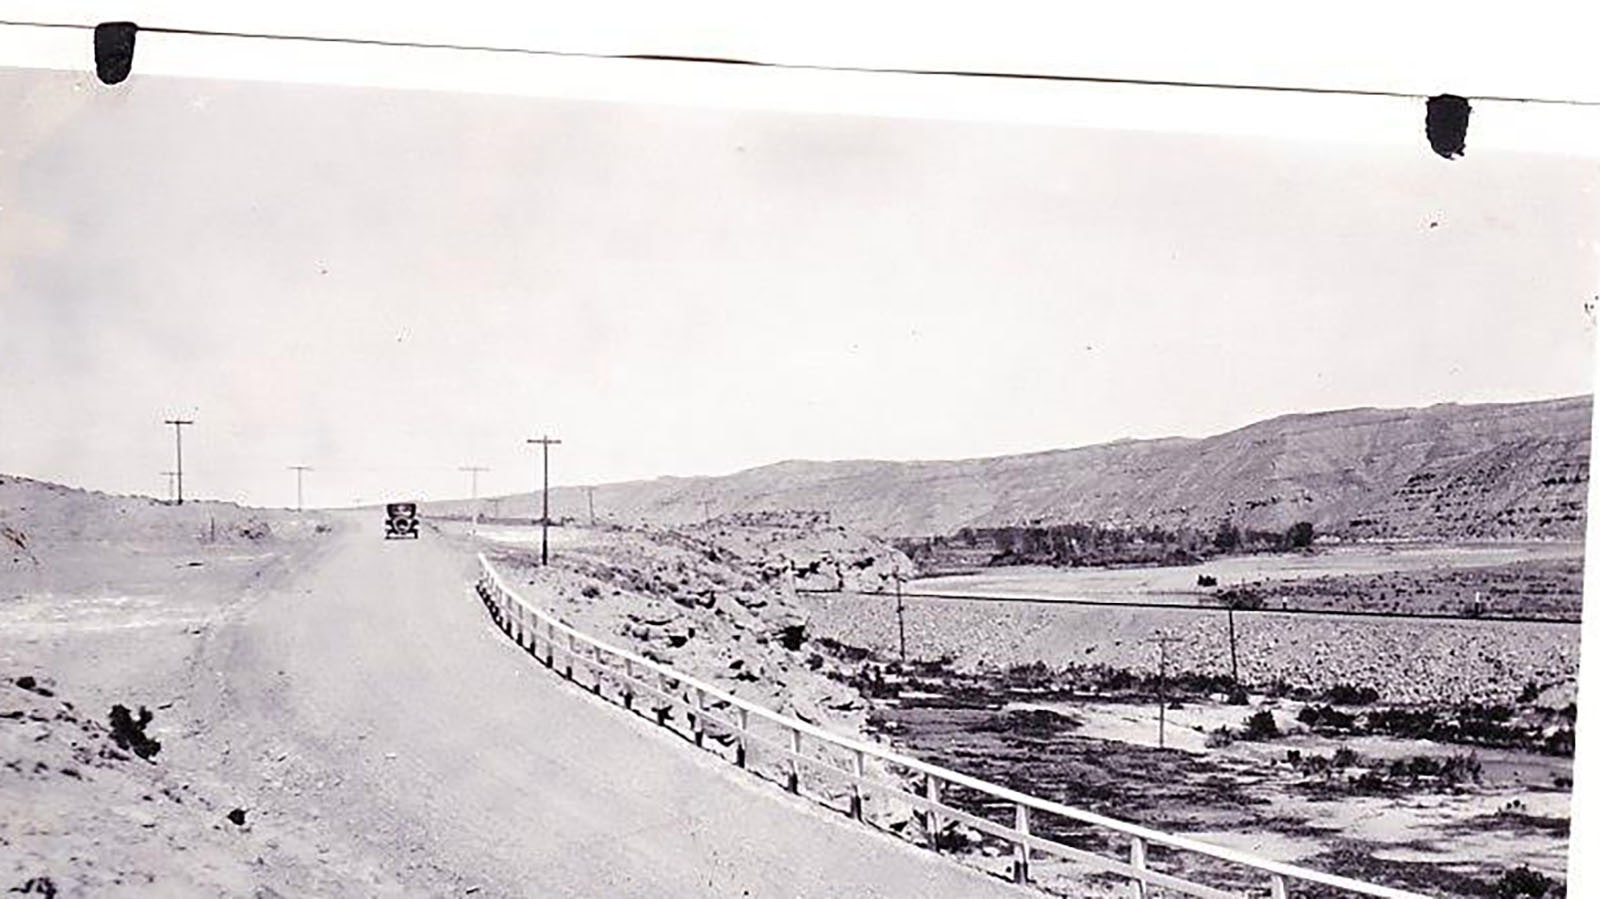 A car driving in the distance on the Yellowstone Highway north of Thermopolis in 1922 before the highway was completed.